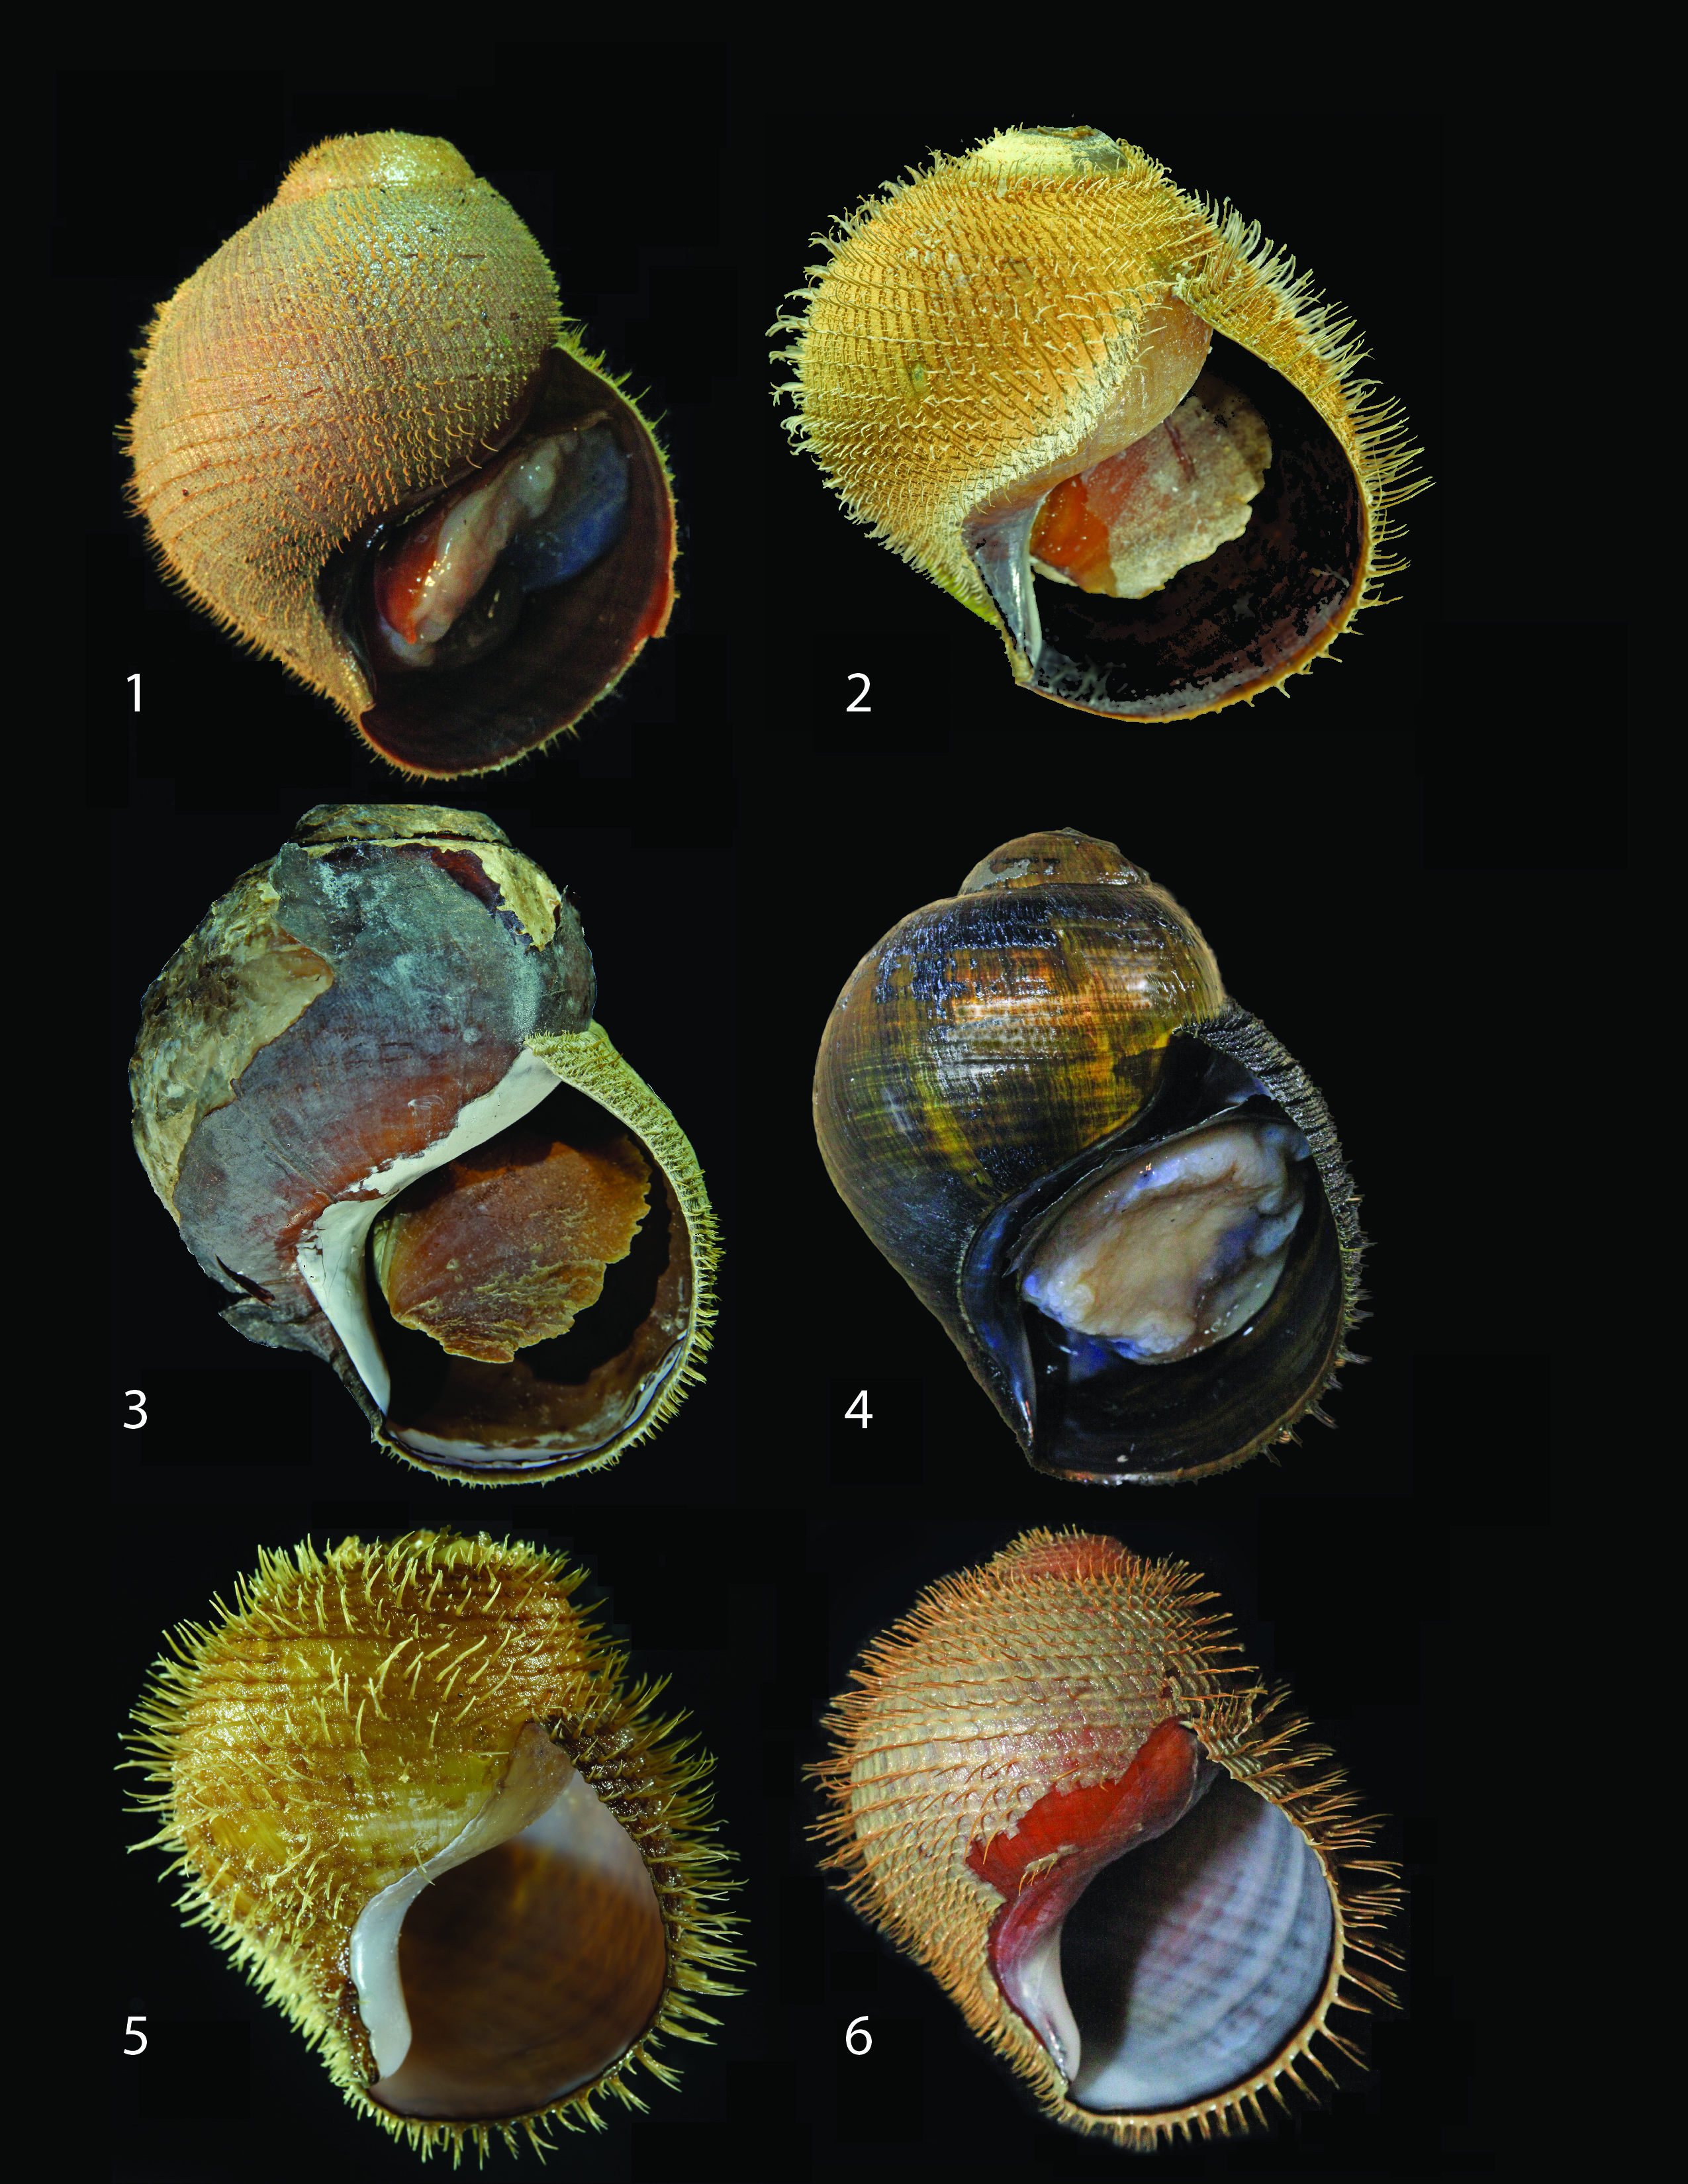 Five new species of Alviniconcha snails were identified using DNA sequences. (Shannon Johnson—MBARI)